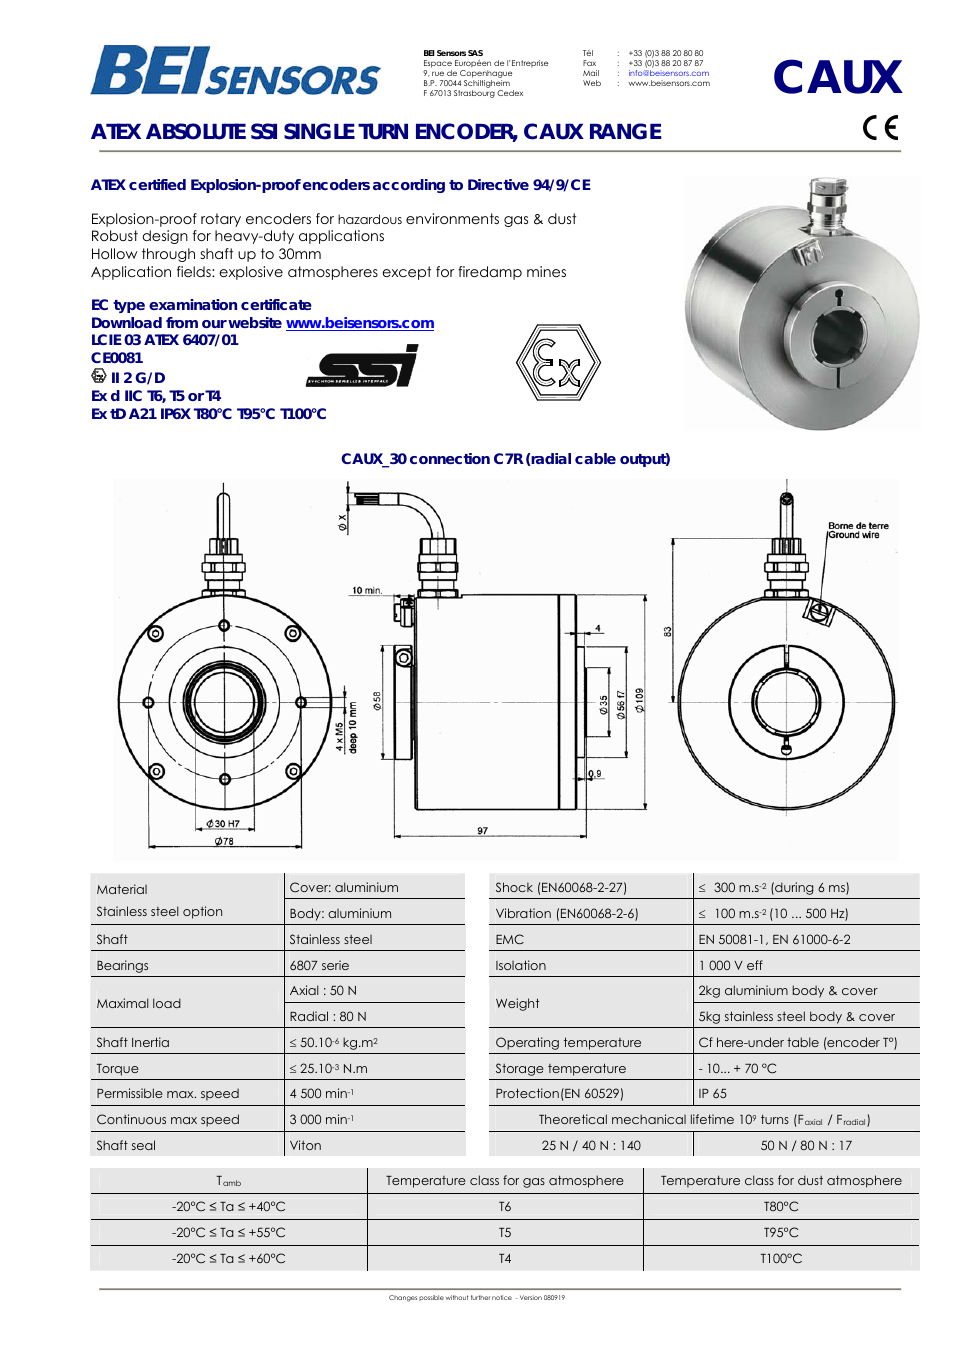 CEUX Absolute Hollow Shaft Encoder